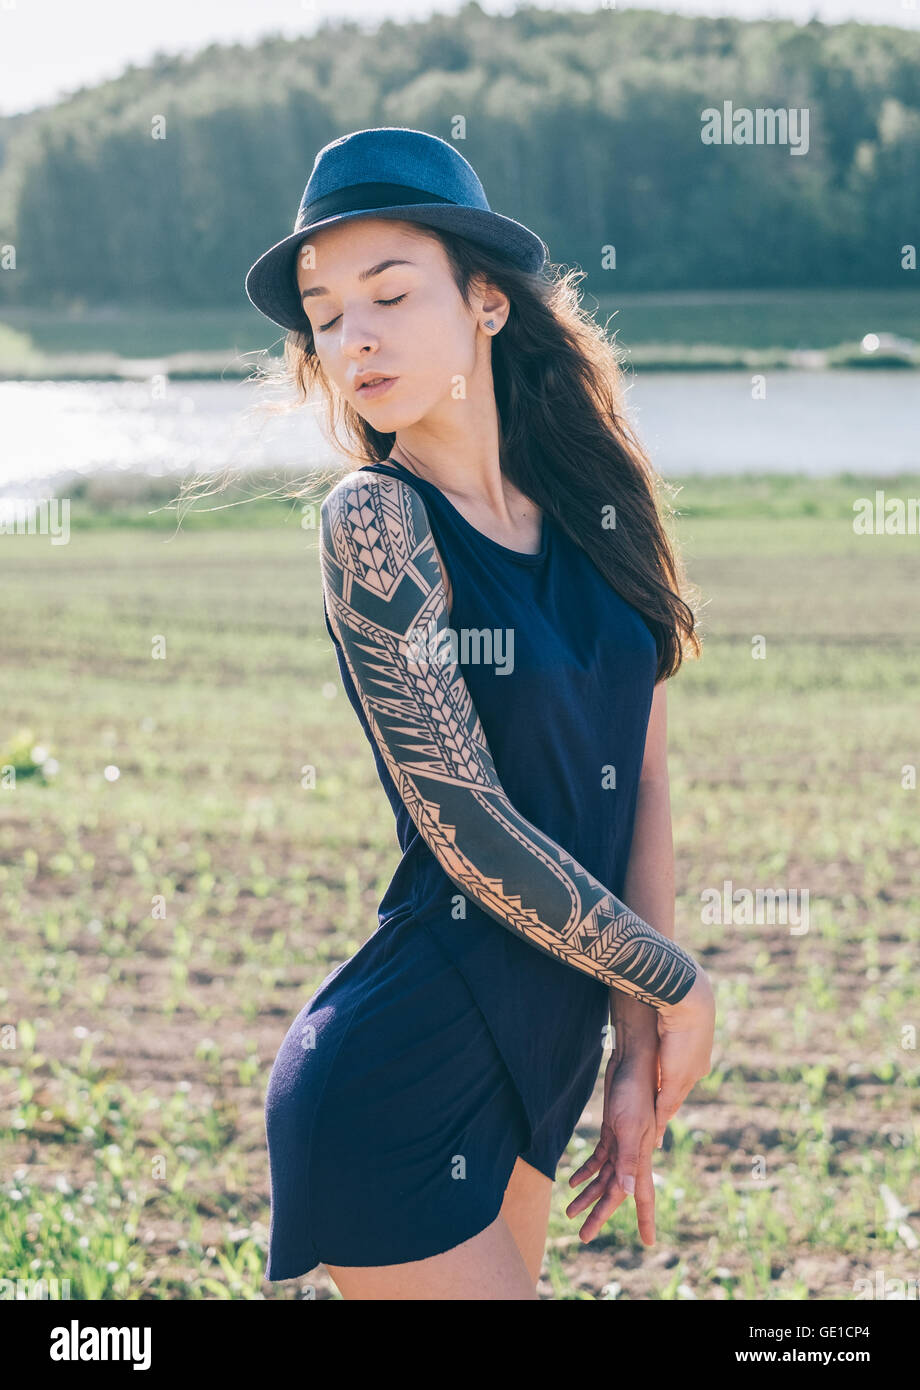 Hipster Woman with tattoo sleeve standing in rural landscape Stock Photo